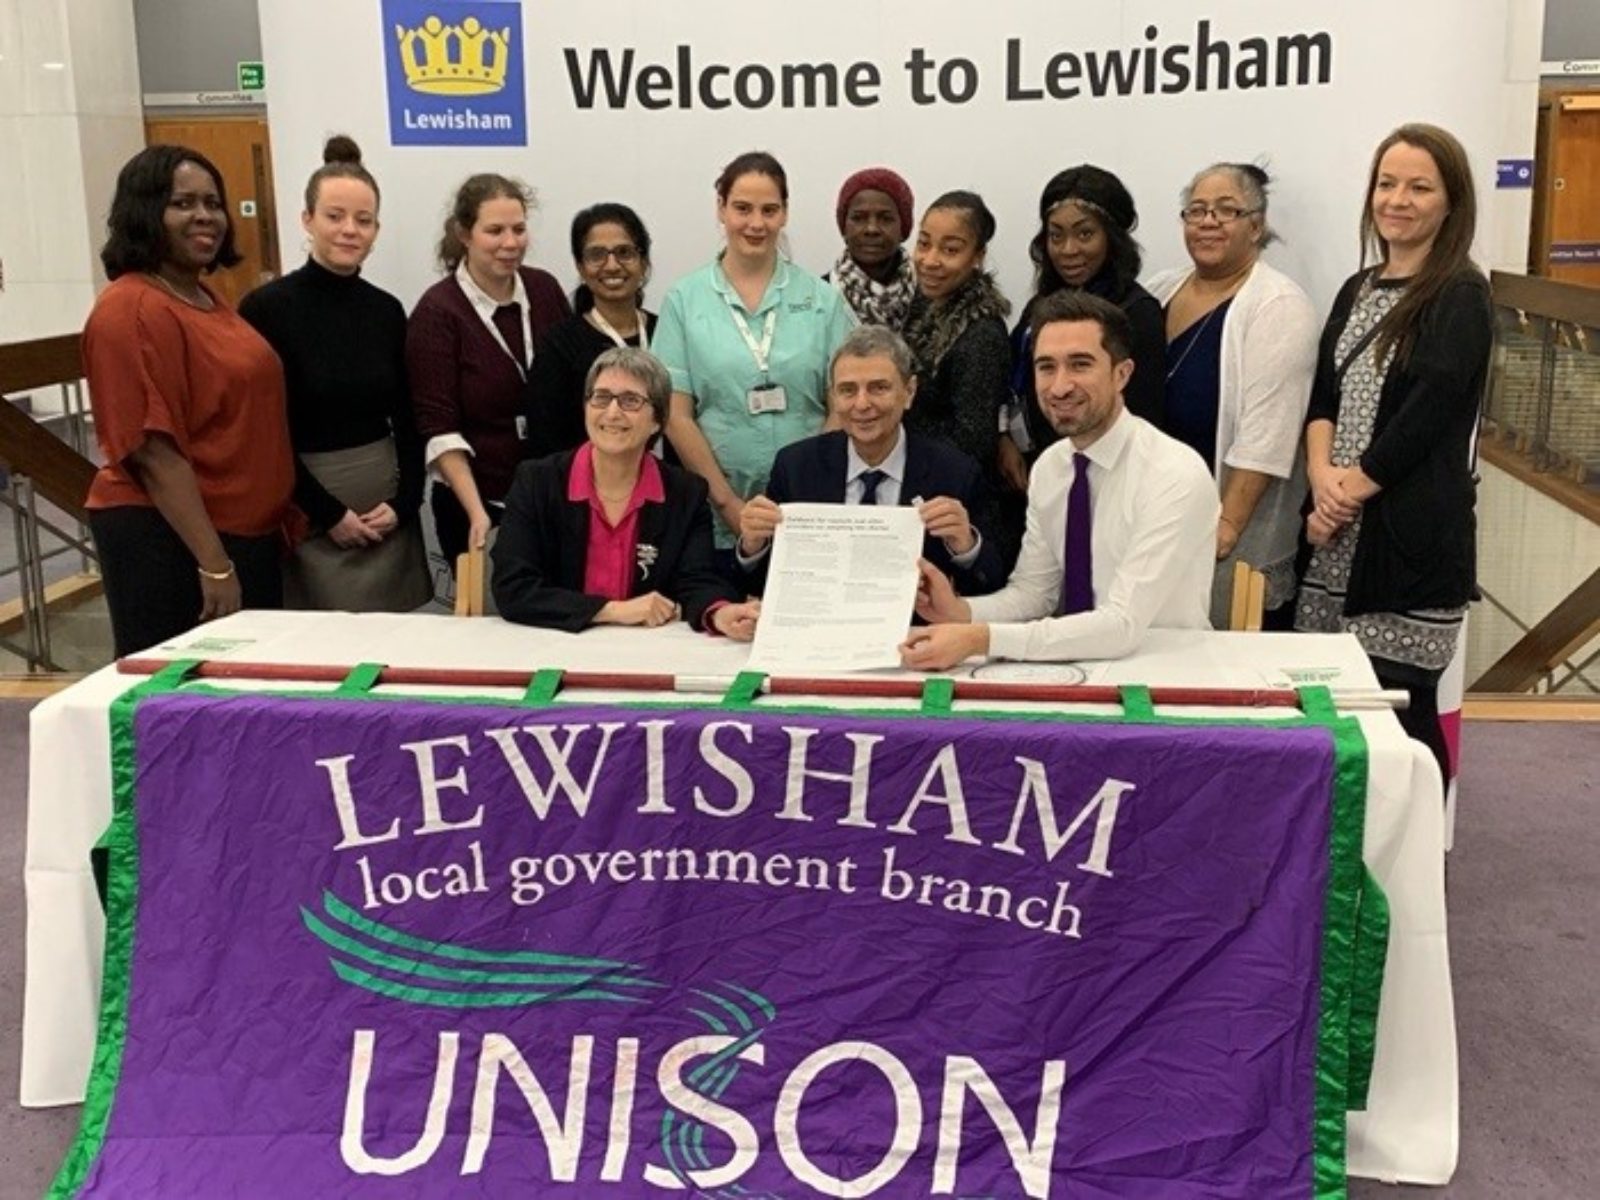 Mayor Damien Egan and Cllr Chris Best, Deputy Mayor and Cabinet Member for Health and Adult Social Care, signing the UNISON Ethical Care Charter with Dave Prentis, previous General Secretary of UNISON, in 2018